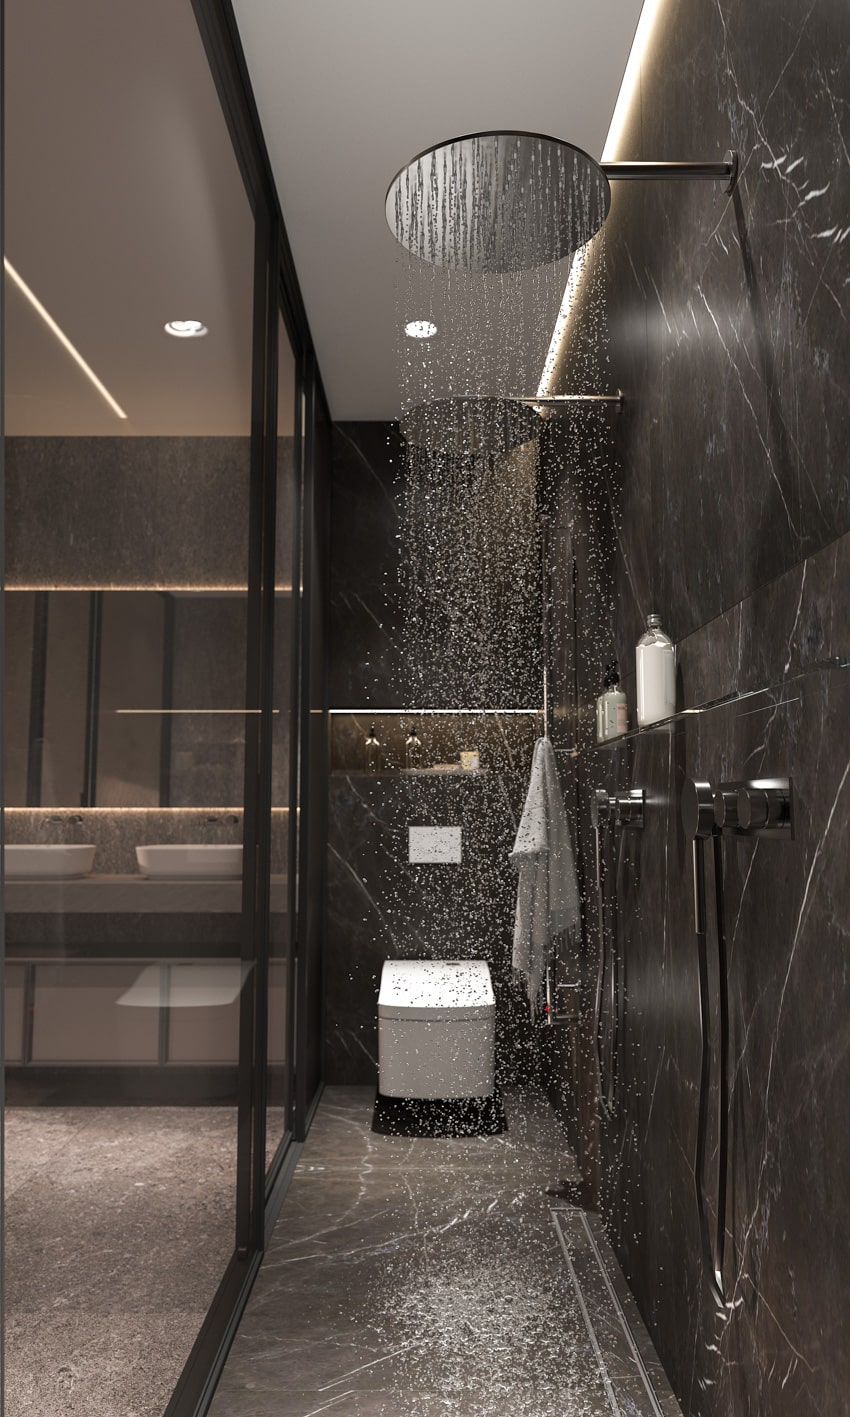 Rainfall shower with black soapstone floor and wall tiles with water heater